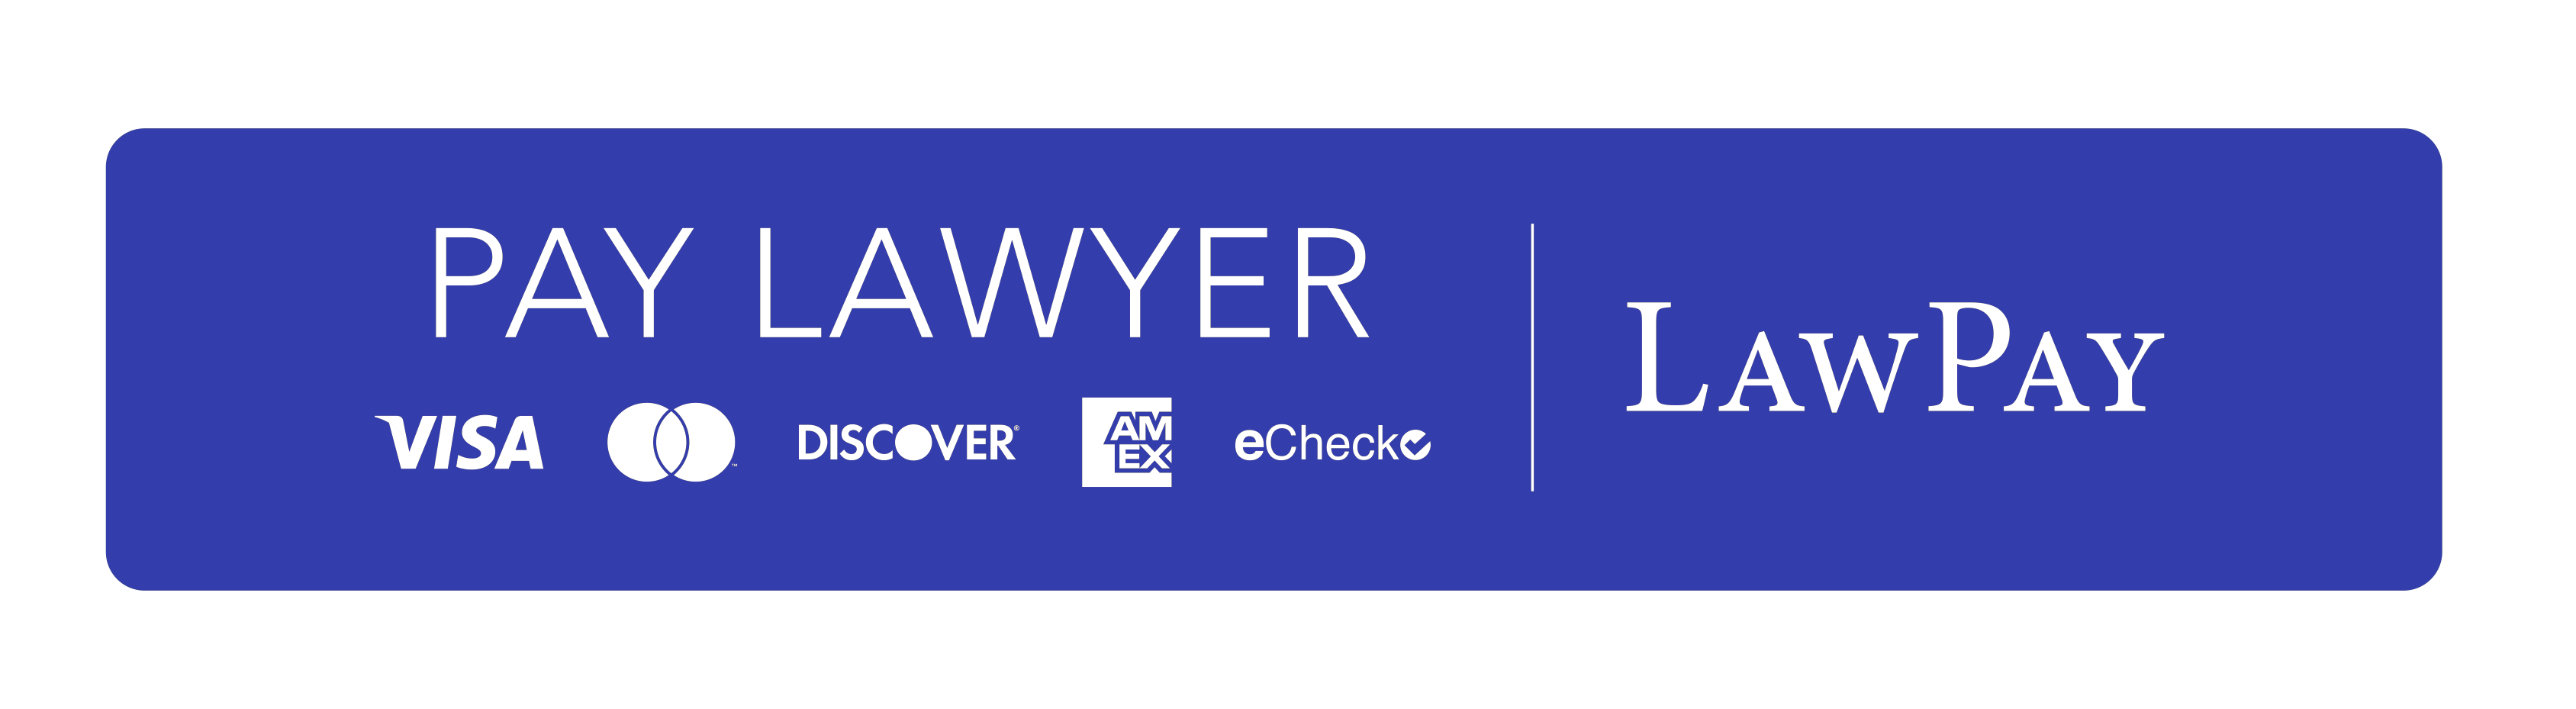 Pay Lawyer, Visa, Discover, American Express, eCheck. Law Pay